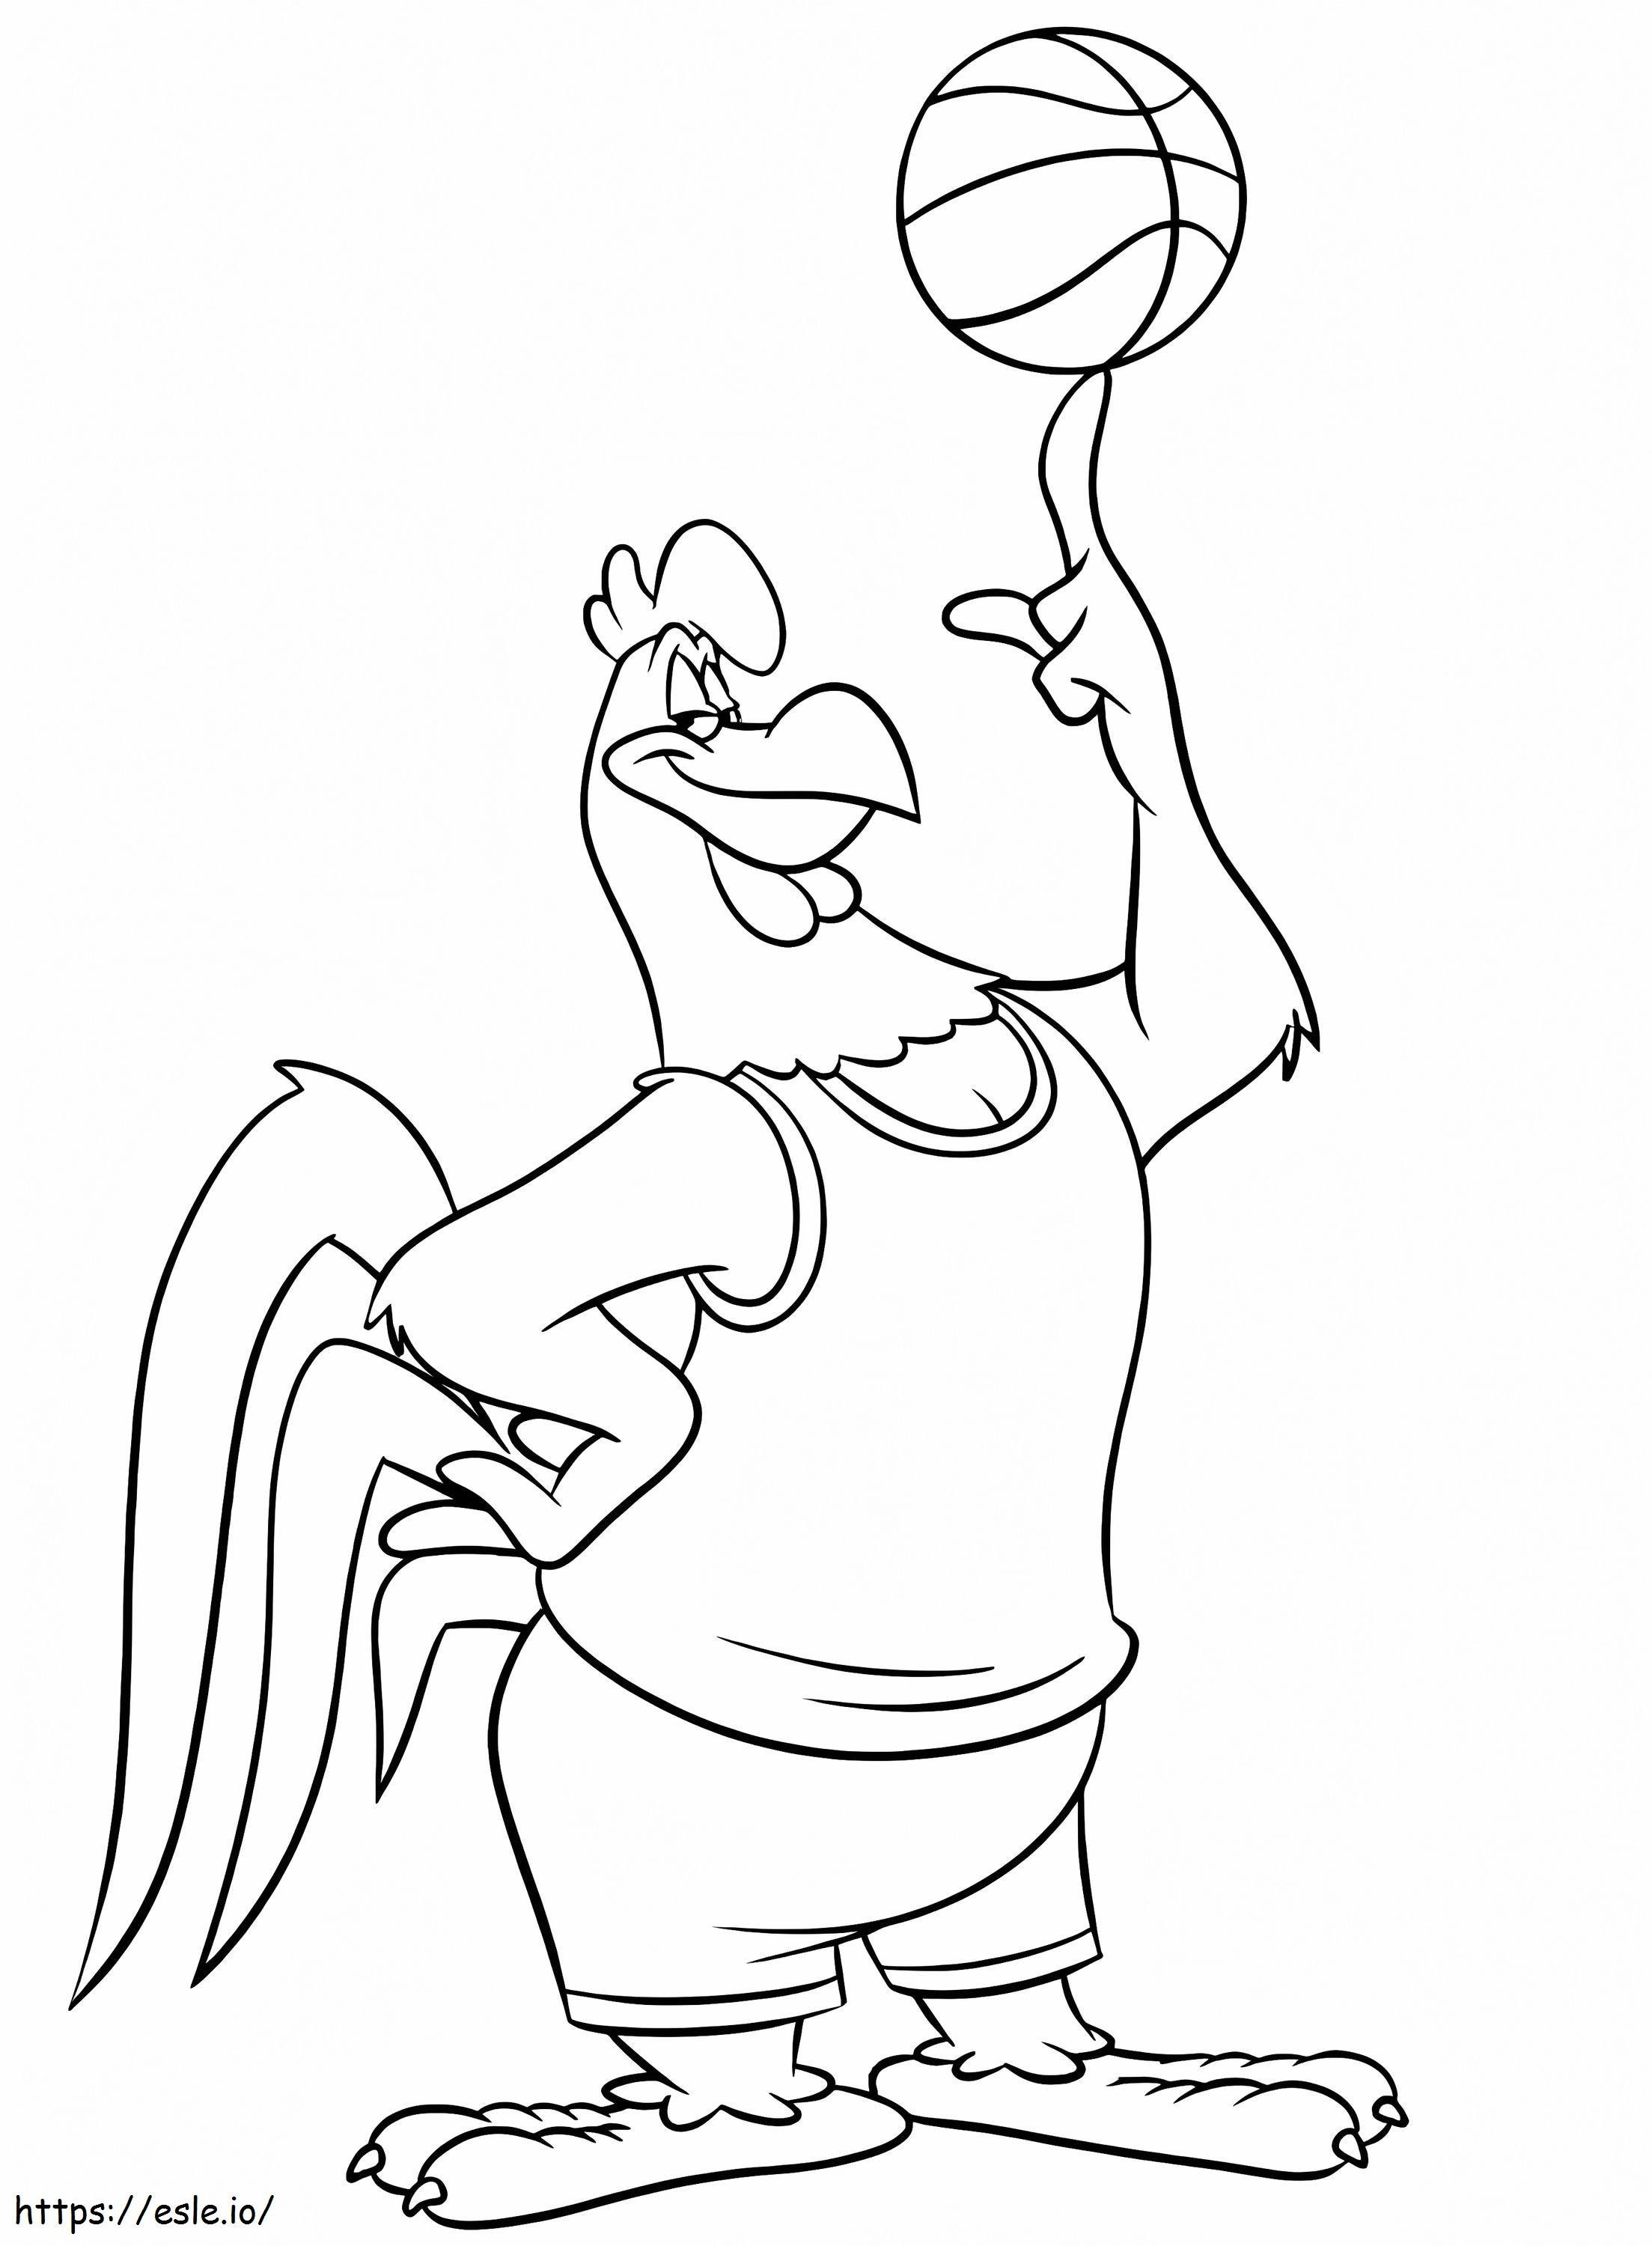 Foghorn Leghorn 2 coloring page